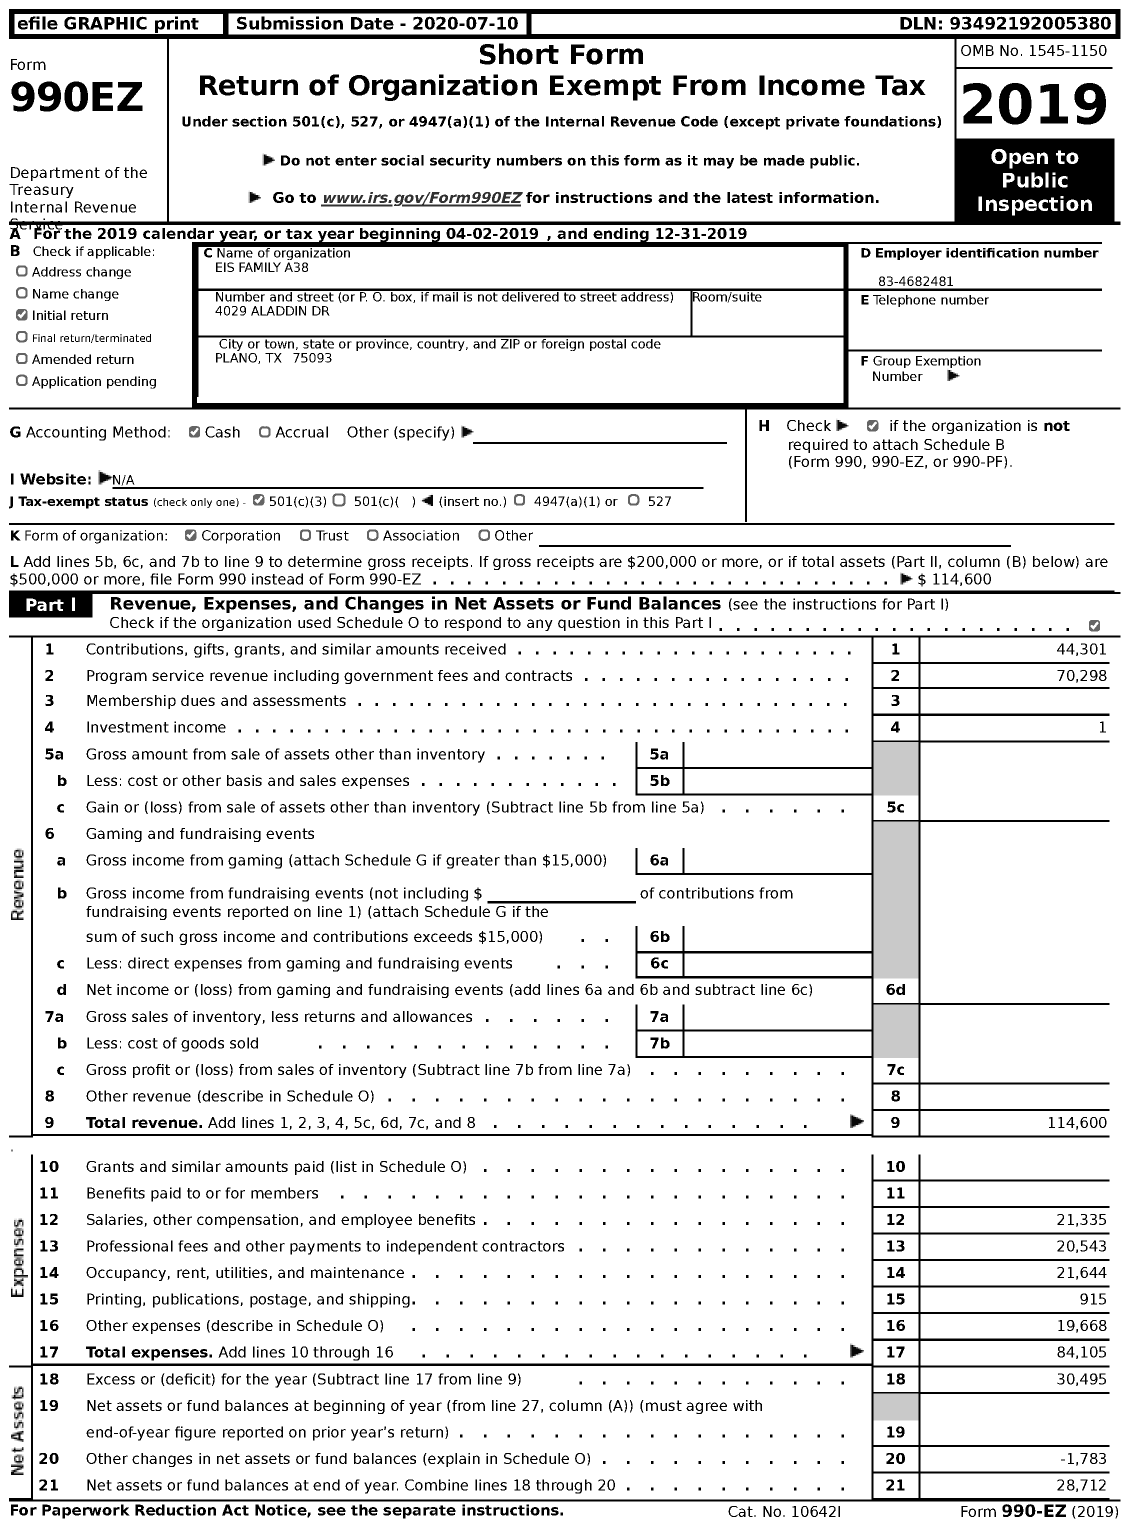 Image of first page of 2019 Form 990EZ for Eis Family A38